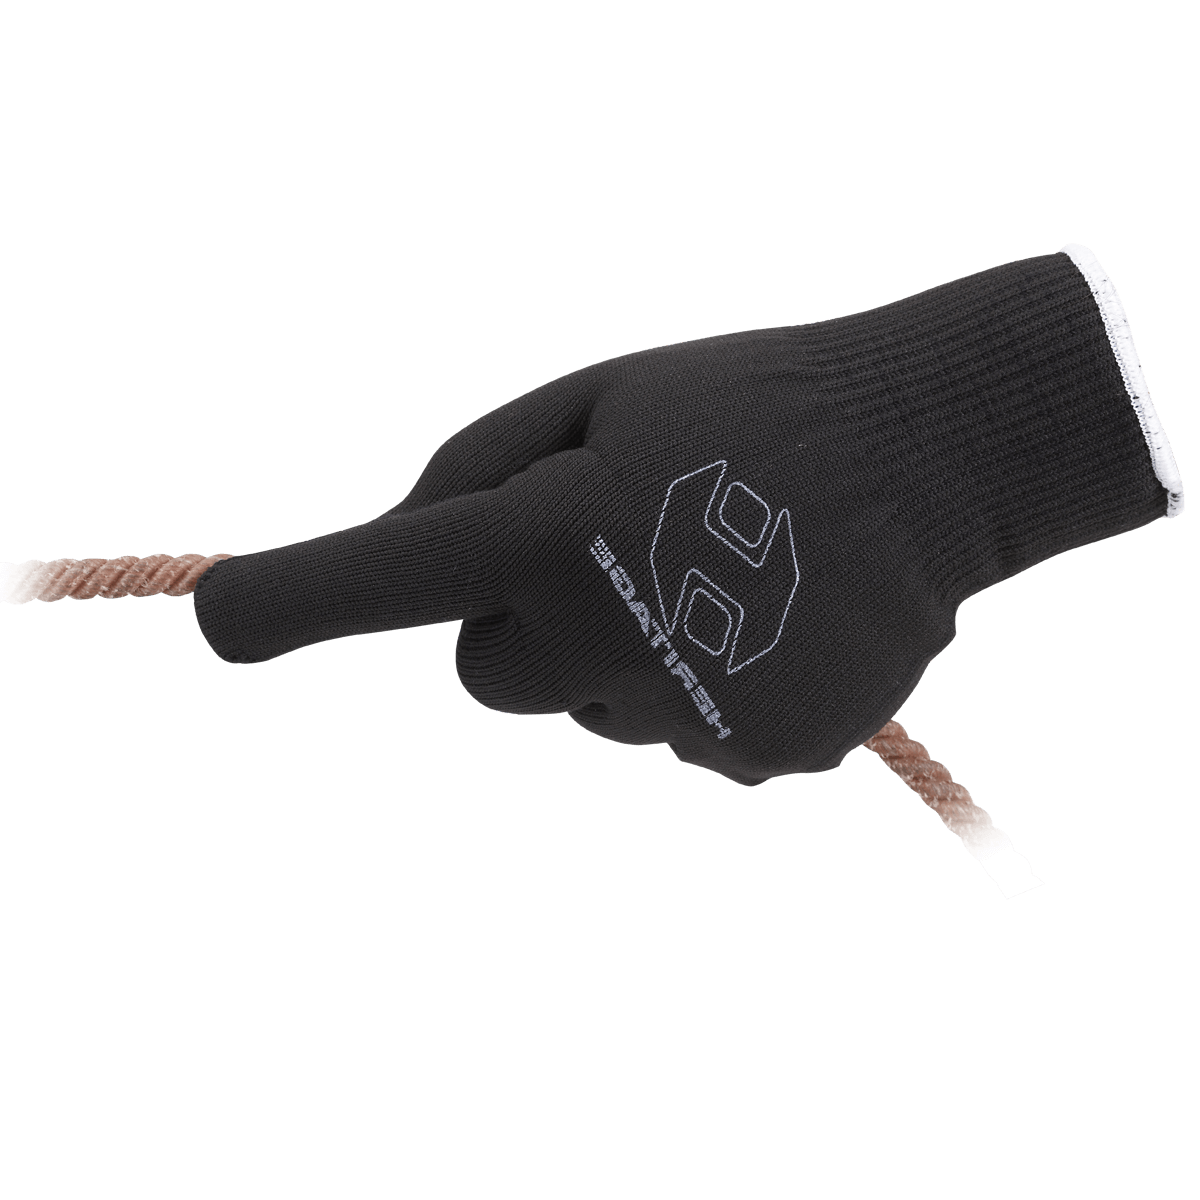 Progrip Roping Glove 12/Pack